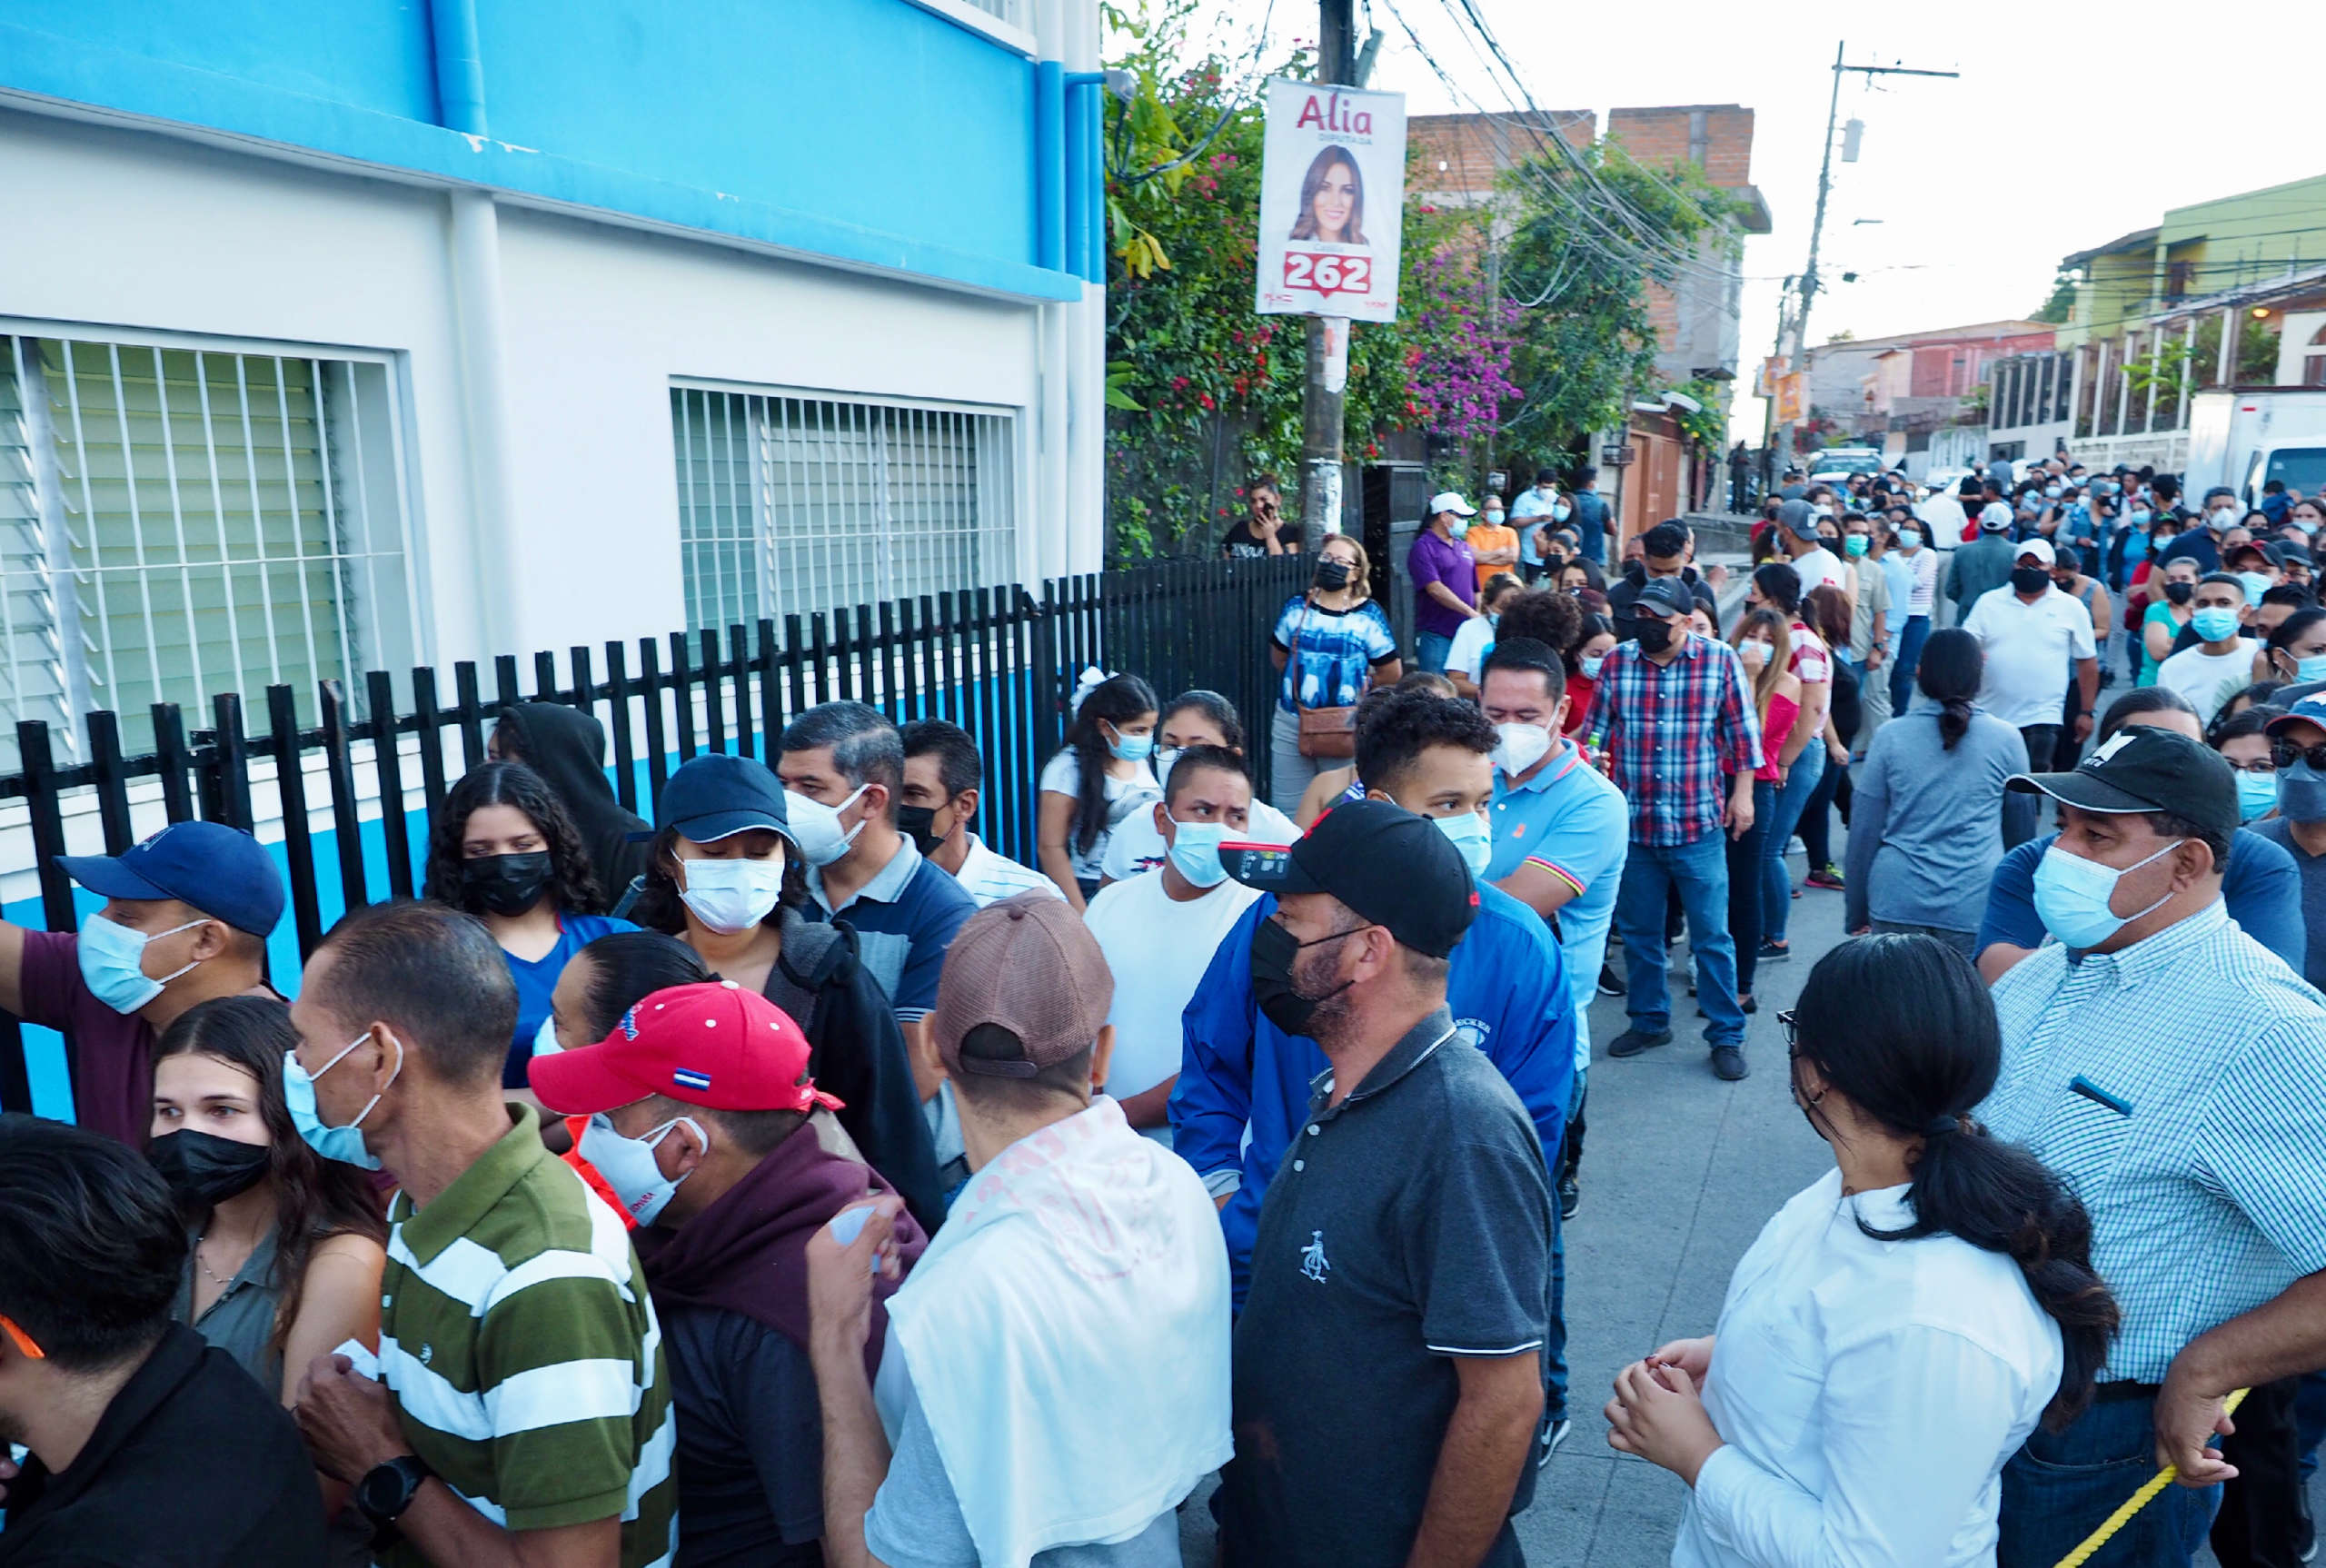 Voters outside the Panama School in the neighborhood of Buenos Aires, Tegucigalpa wait in long queues to enter the voting center